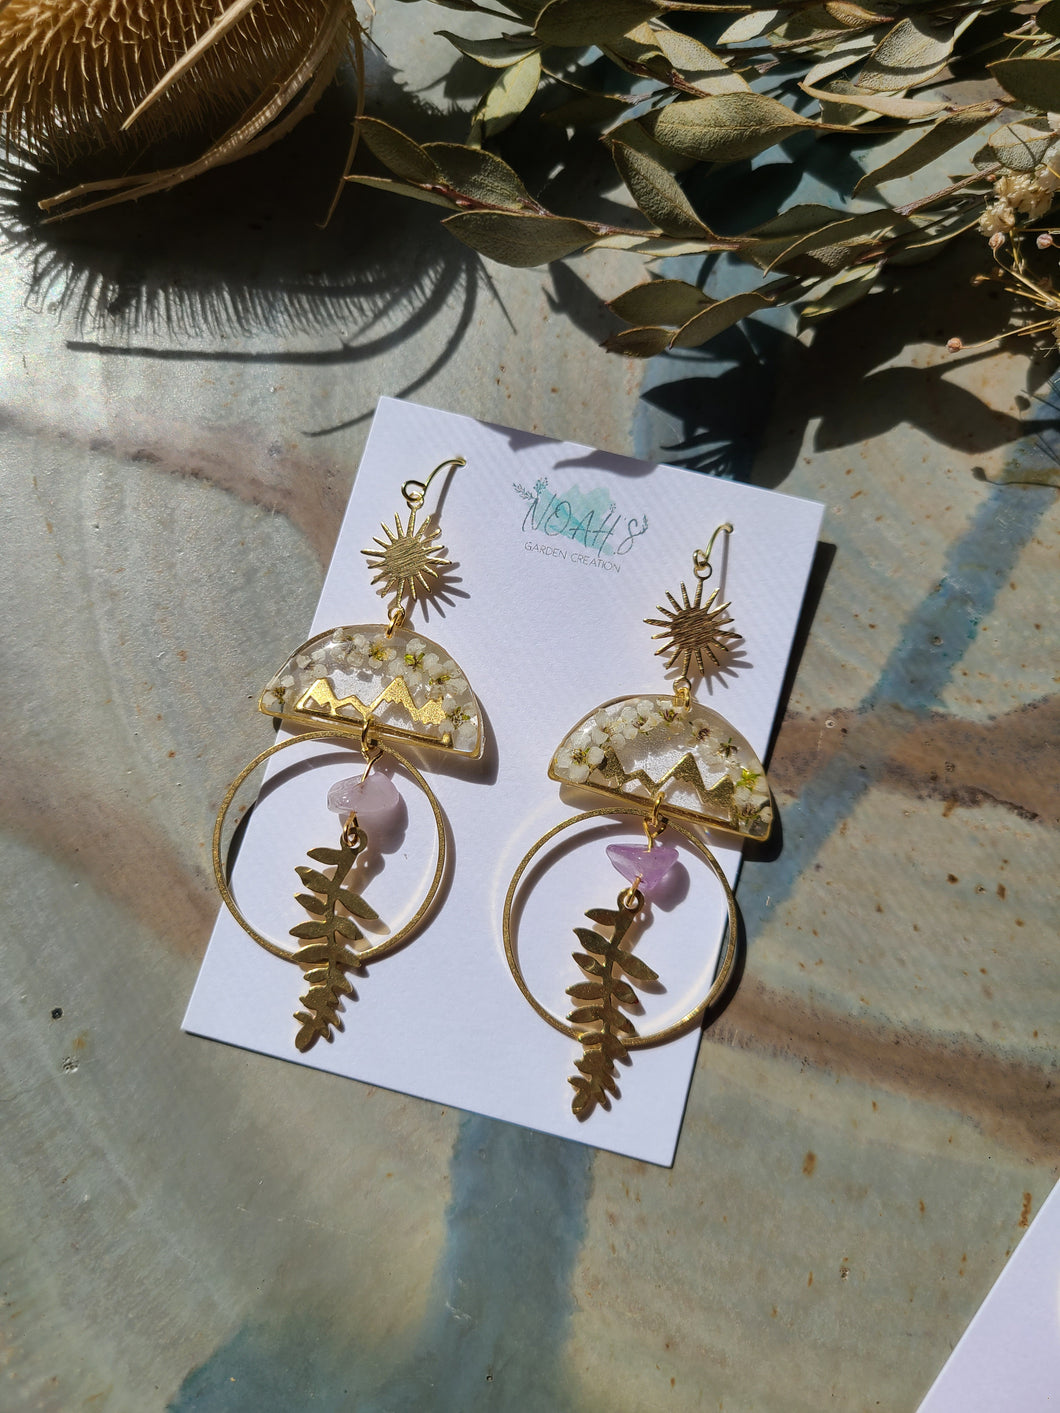 Mountain collection-Sun &Ferns, small white Alyssum flowers, real pressed flower in resin, hammered brass